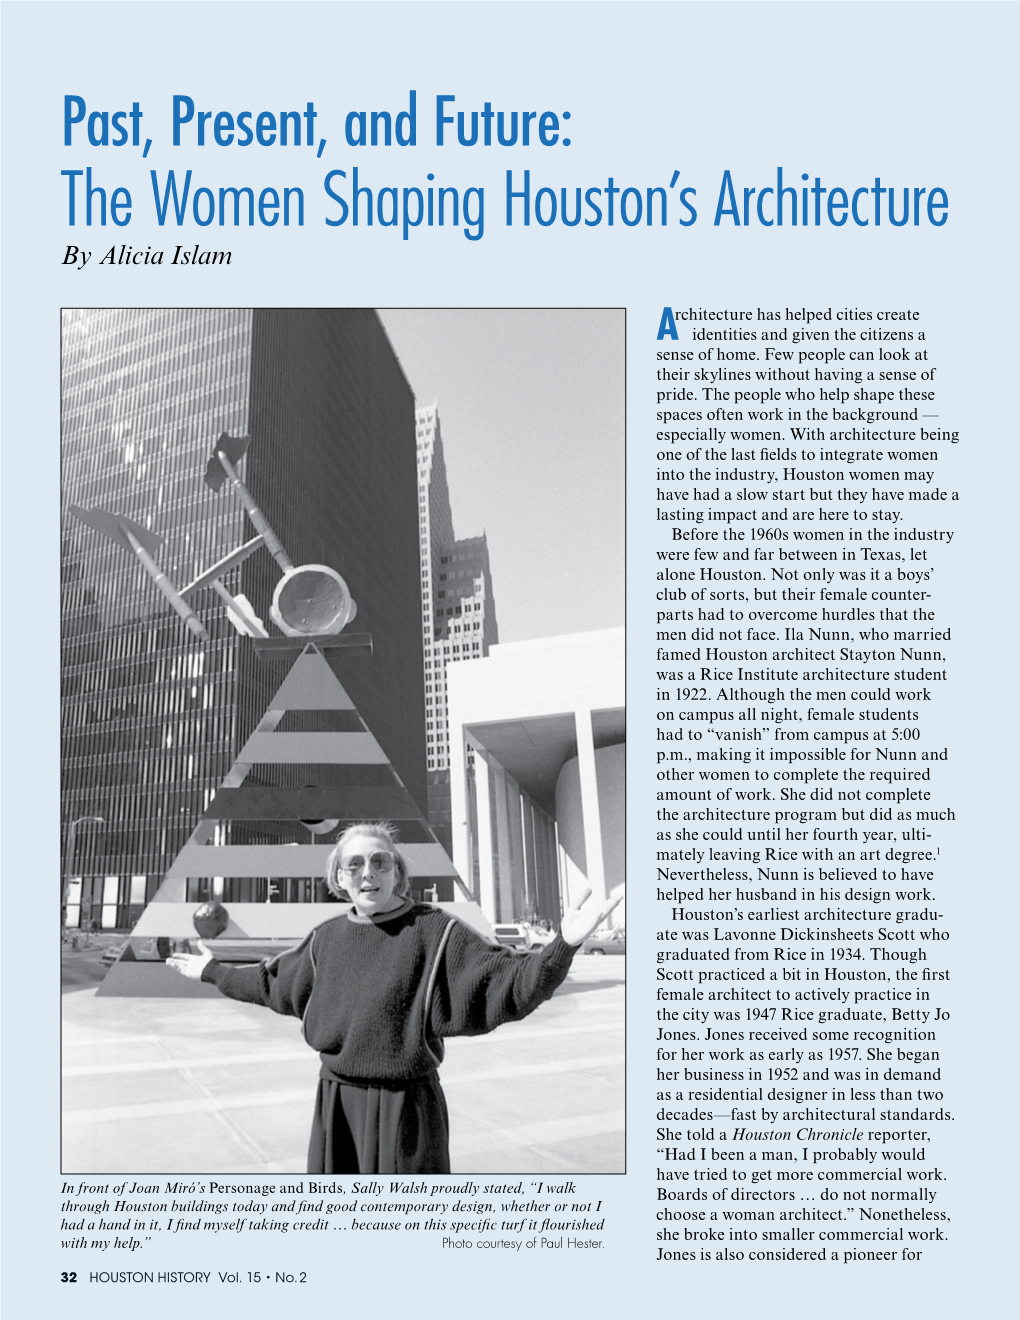 The Women Shaping Houston's Architecture